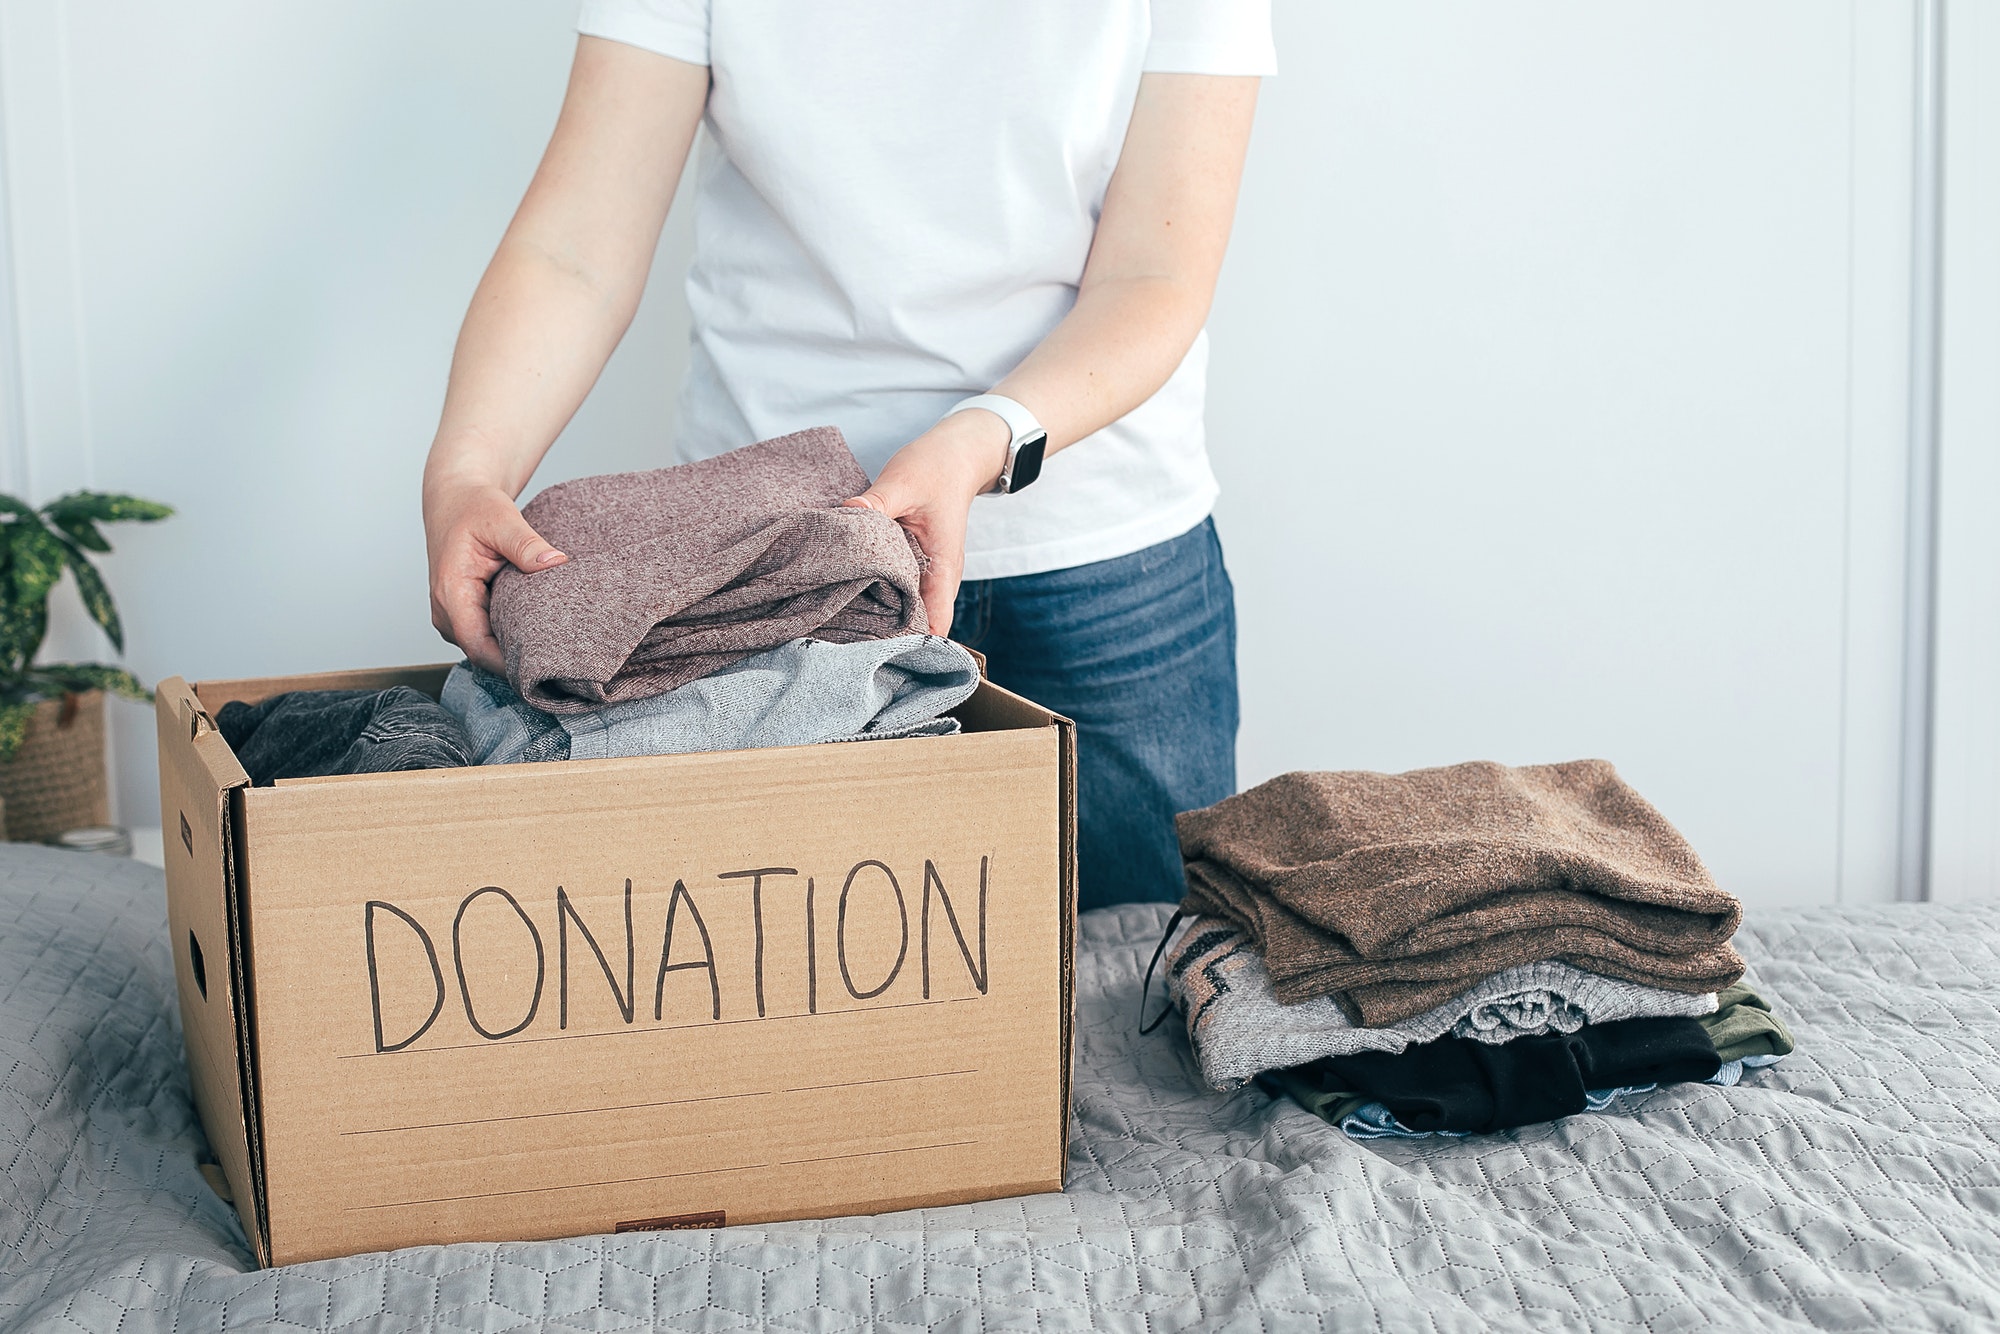 https://smoothmoveremovals.com.au/wp-content/uploads/2021/08/donation-concept-young-woman-in-white-t-shirt-with-donation-box-at-home-woman-donates-clothes.jpg